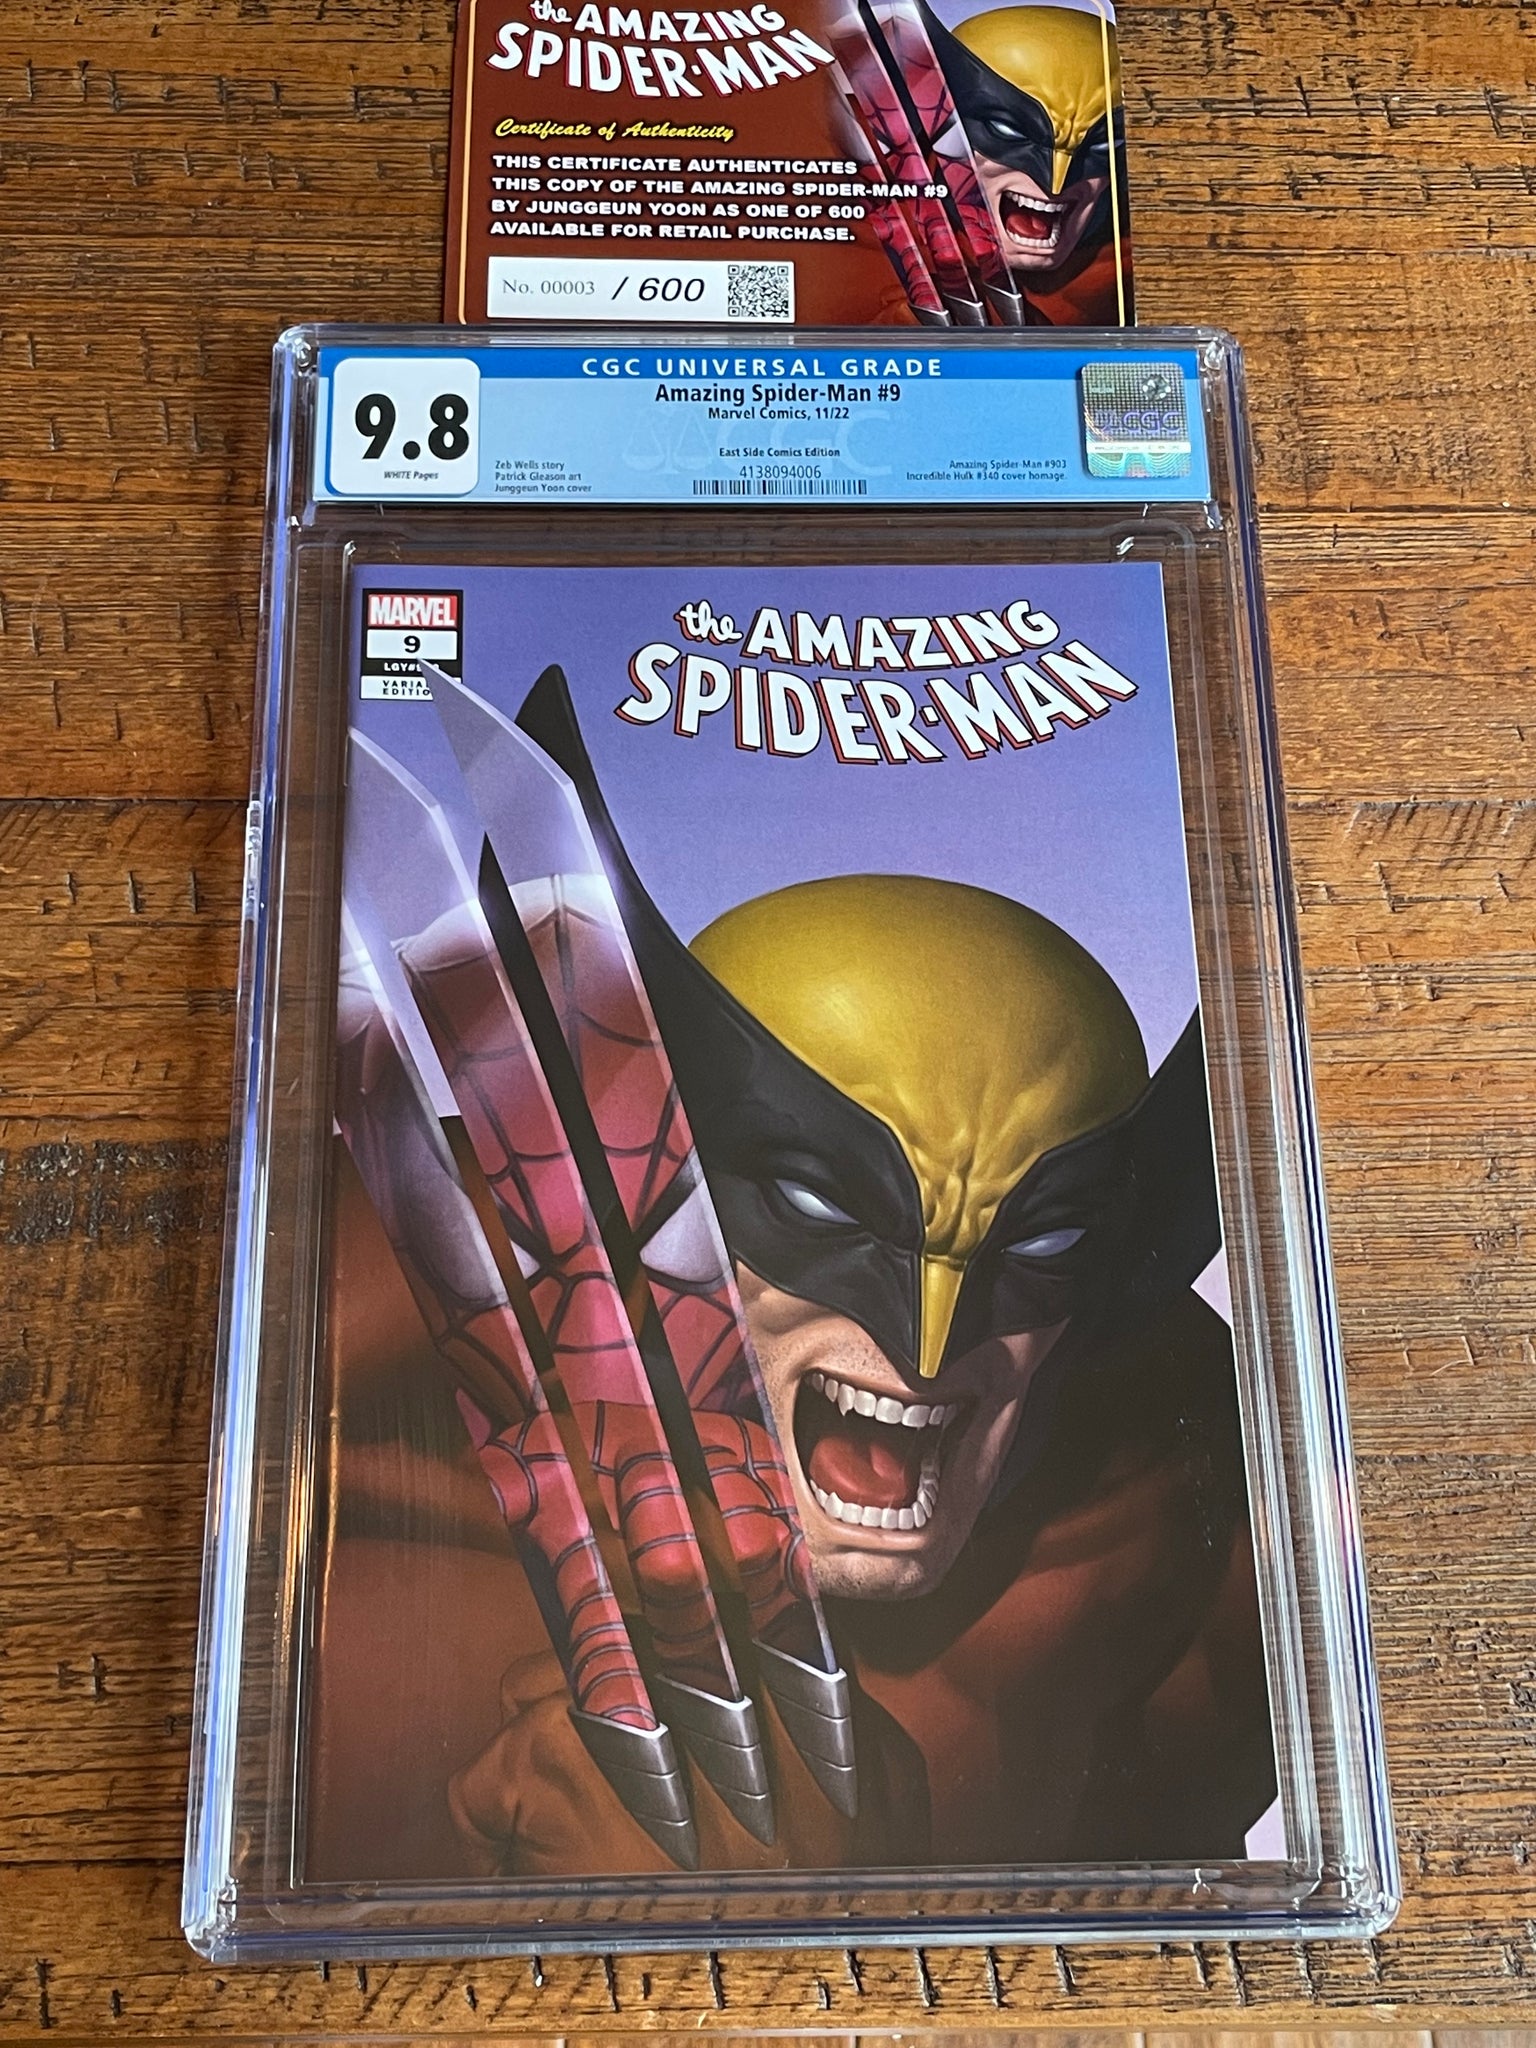 AMAZING SPIDER-MAN #9 CGC 9.8 JUNGGEUN YOON EXCL HOMAGE VARIANT LIMITED TO 600